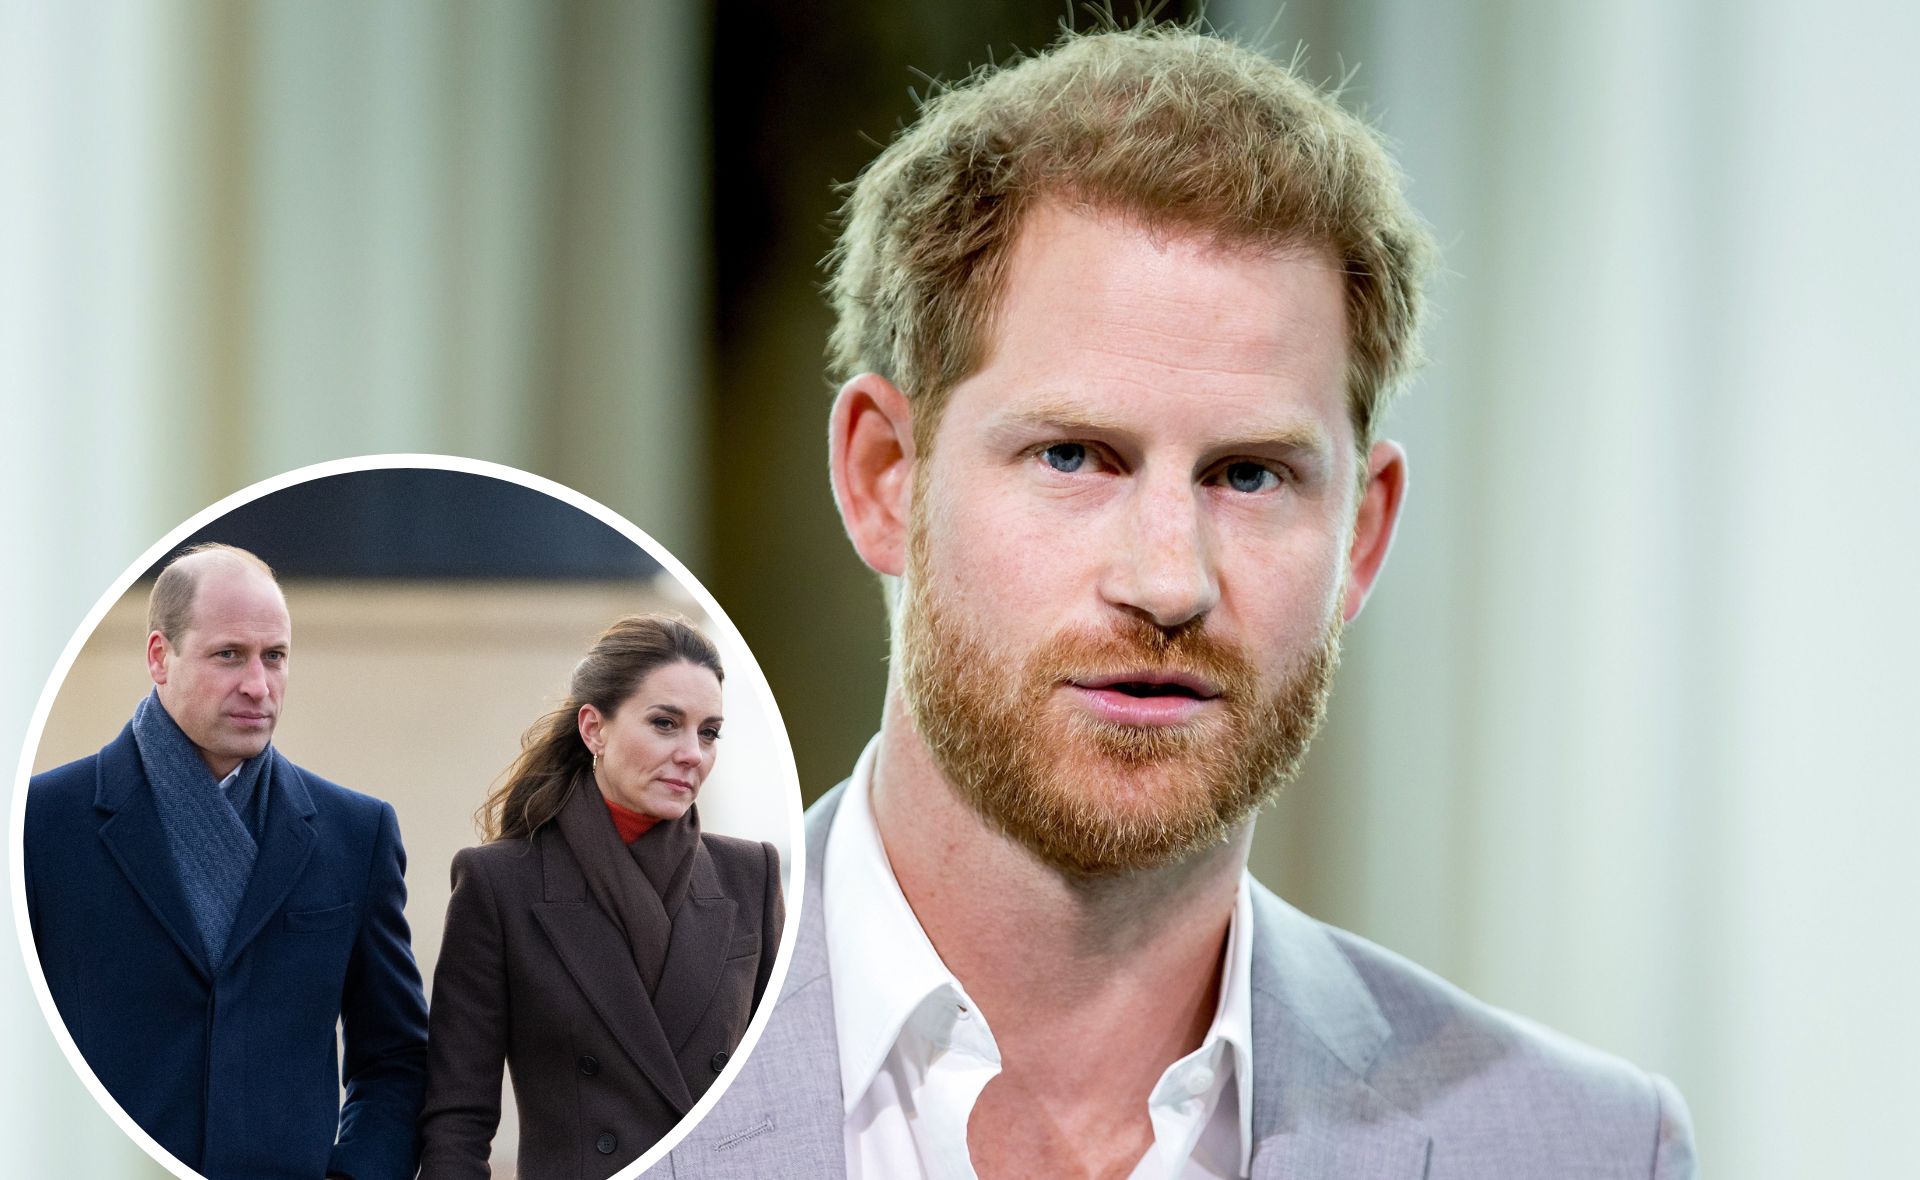 Prince Harry blasted as a hypocrite over leaked security details